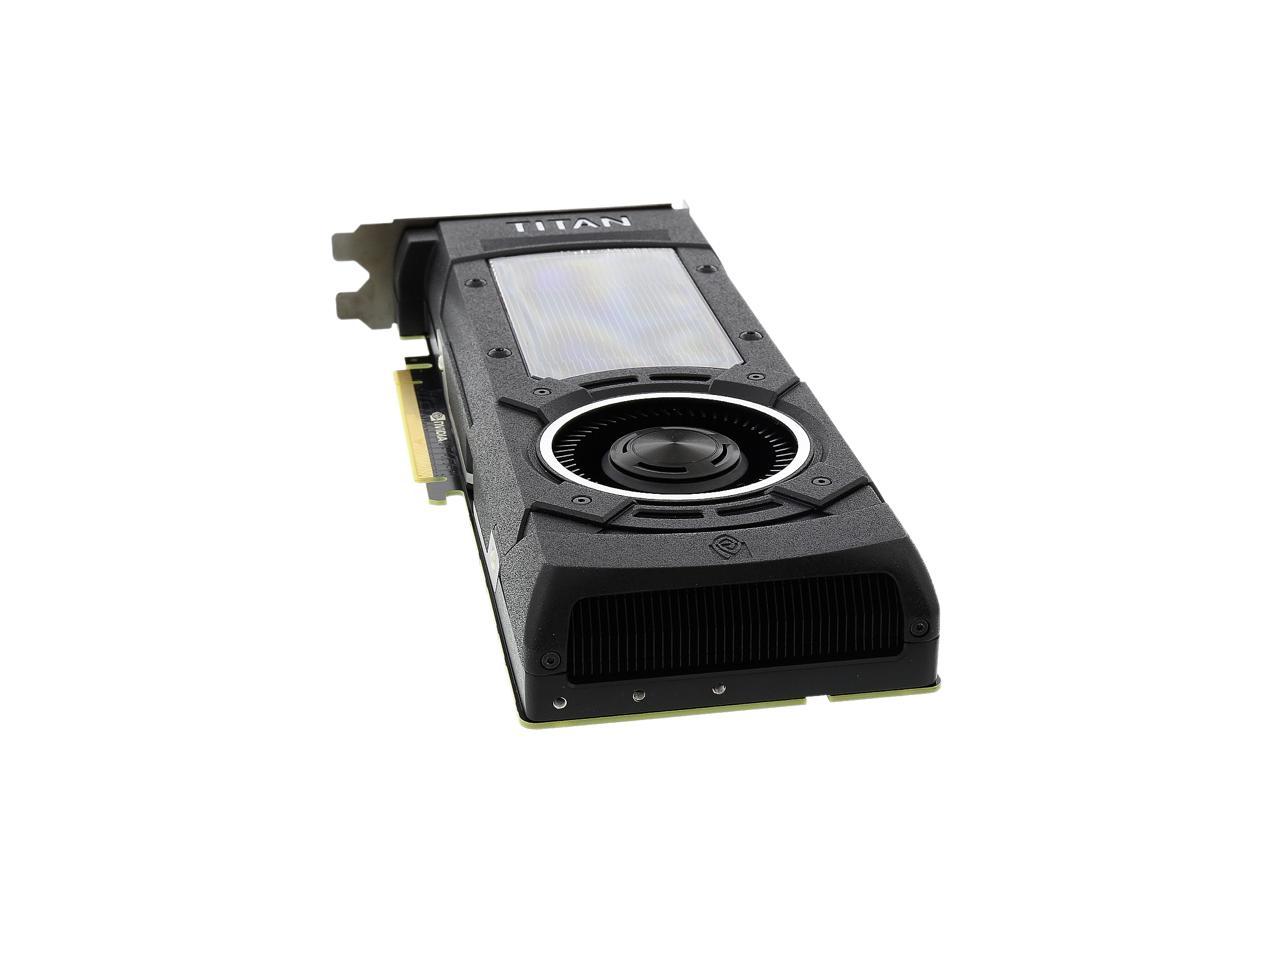 EVGA GeForce GTX TITAN X 12G-P4-2992-KR 12GB SC GAMING, Play 4k with Ease  Graphics Card